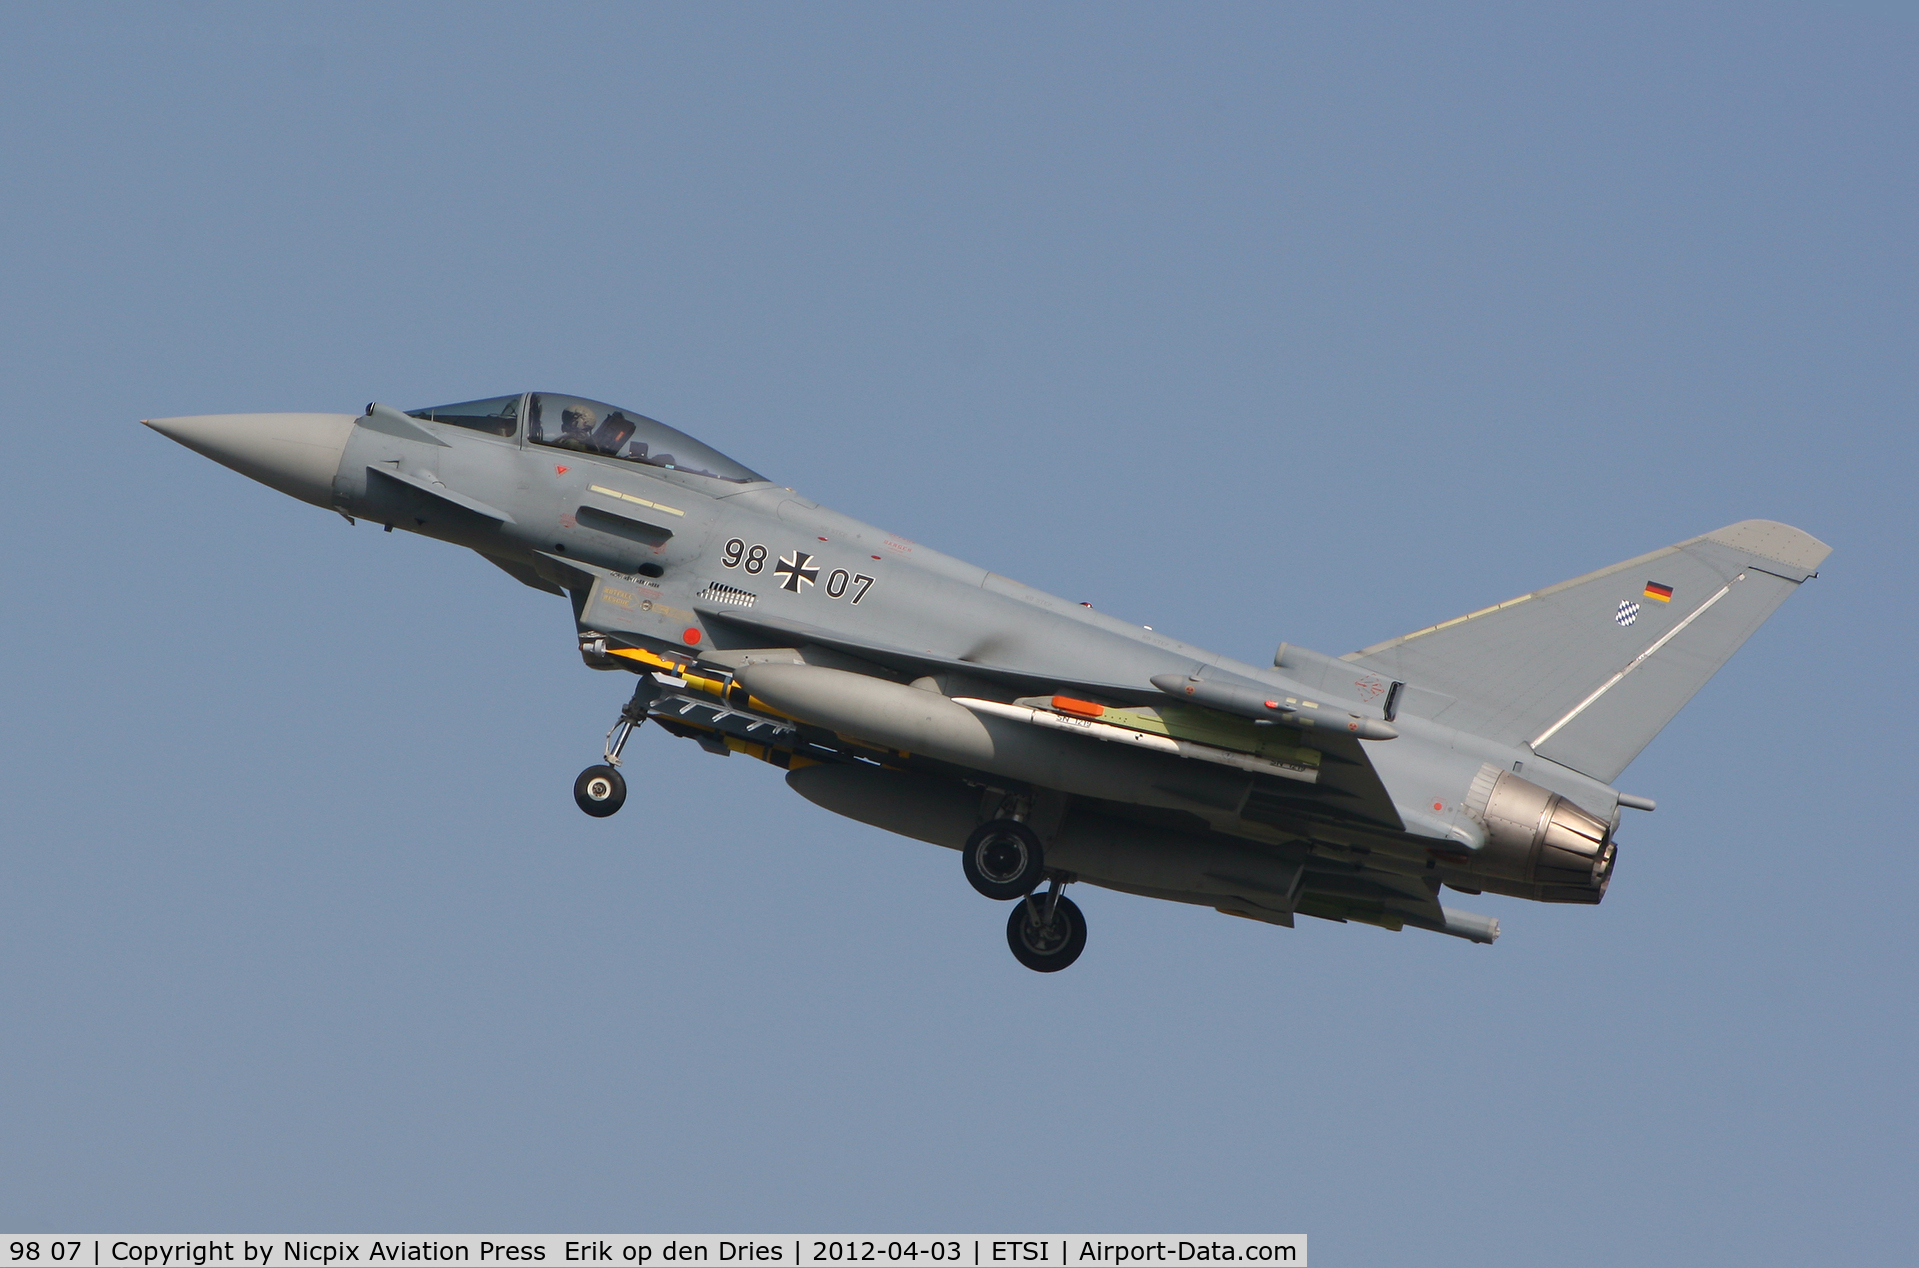 98 07, Eurofighter EF-2000 Typhoon S C/N 151/GS029/PA7, 9807 during an overshoot at Manching AB, Bavaria, Germany.